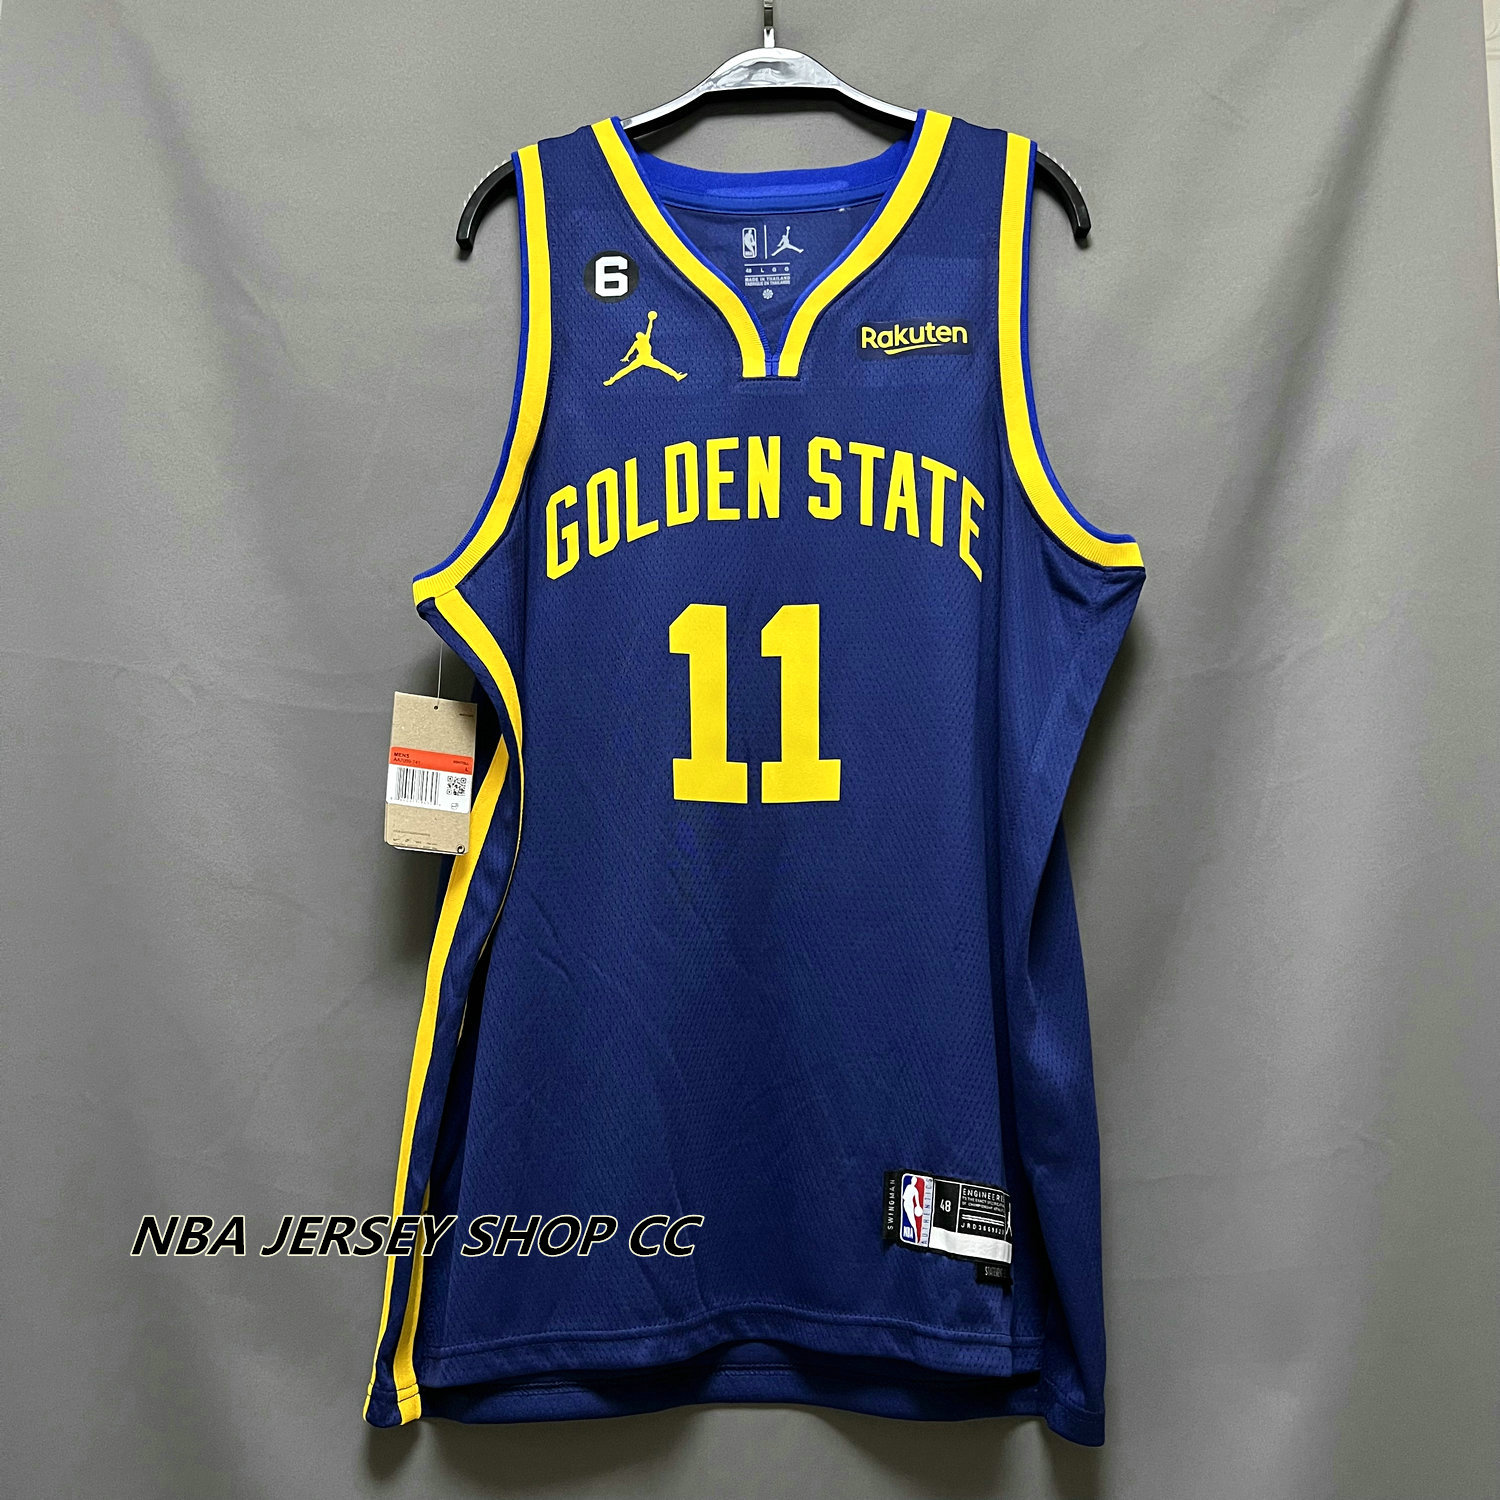 Golden State Warriors "The Town" Klay Thompson #11 Mens